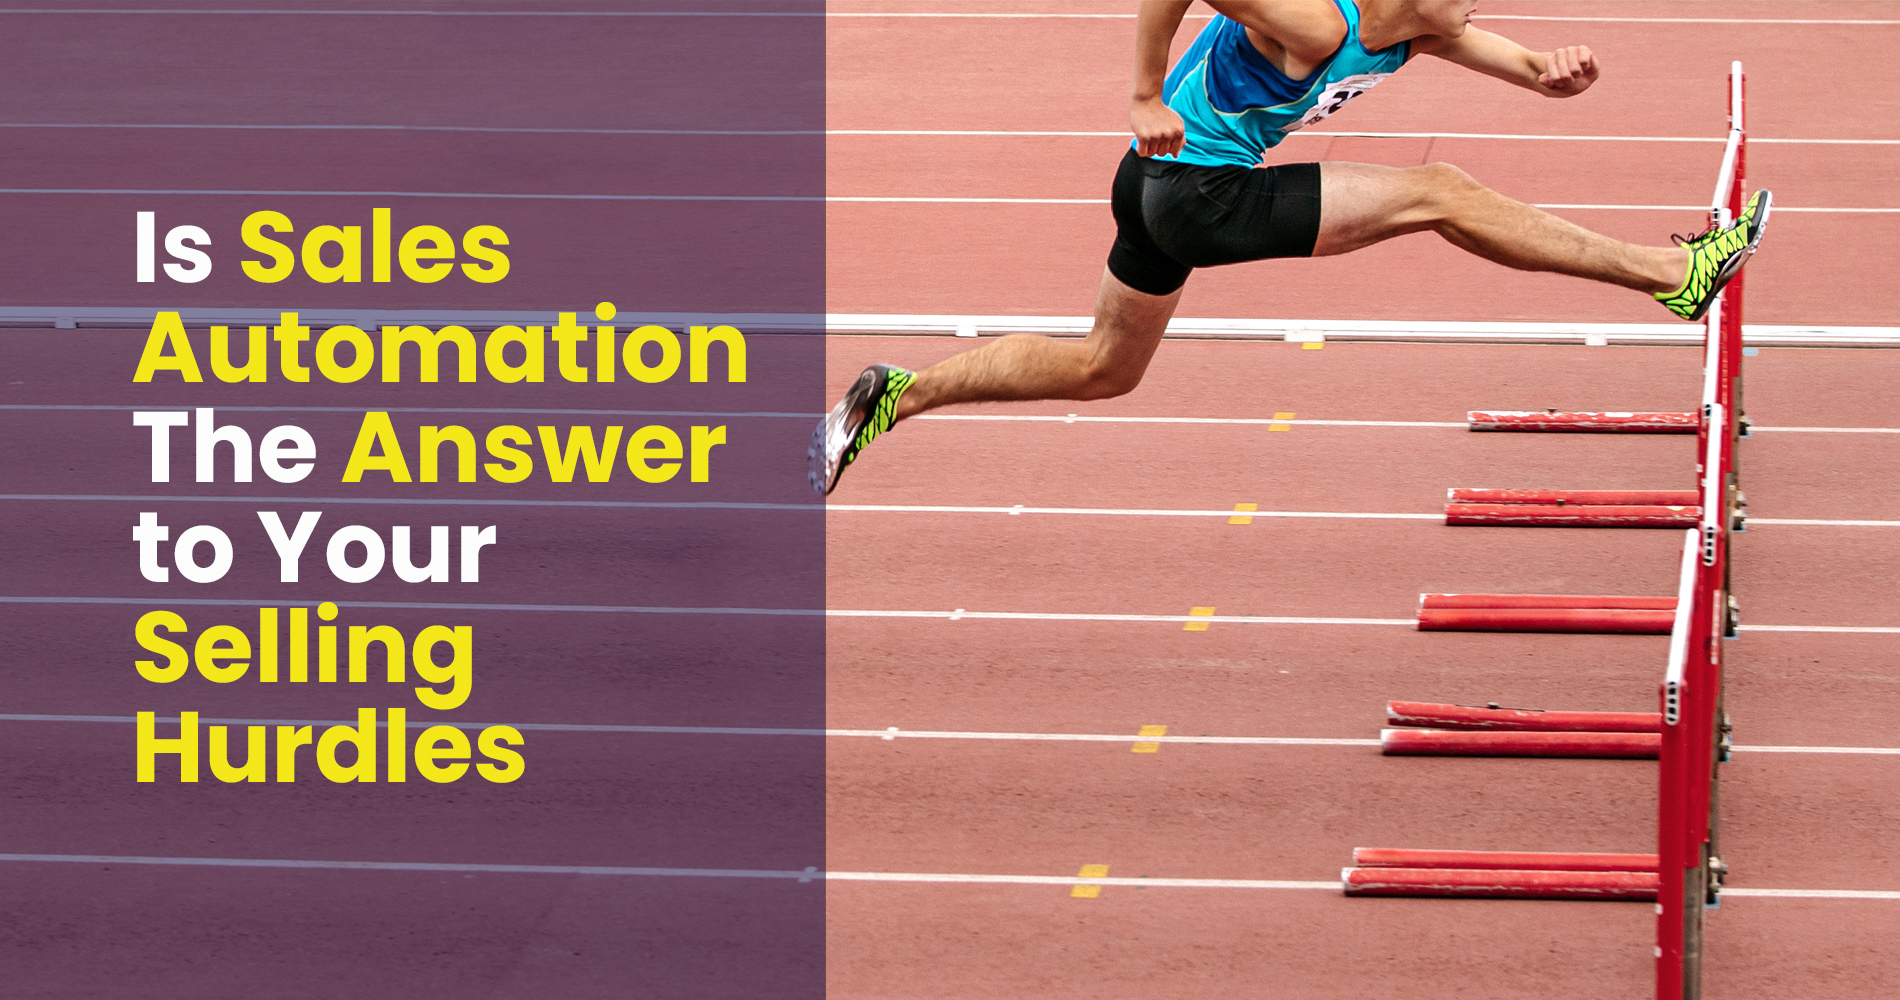 Is Sales Automation The Answer to Your Selling Hurdles